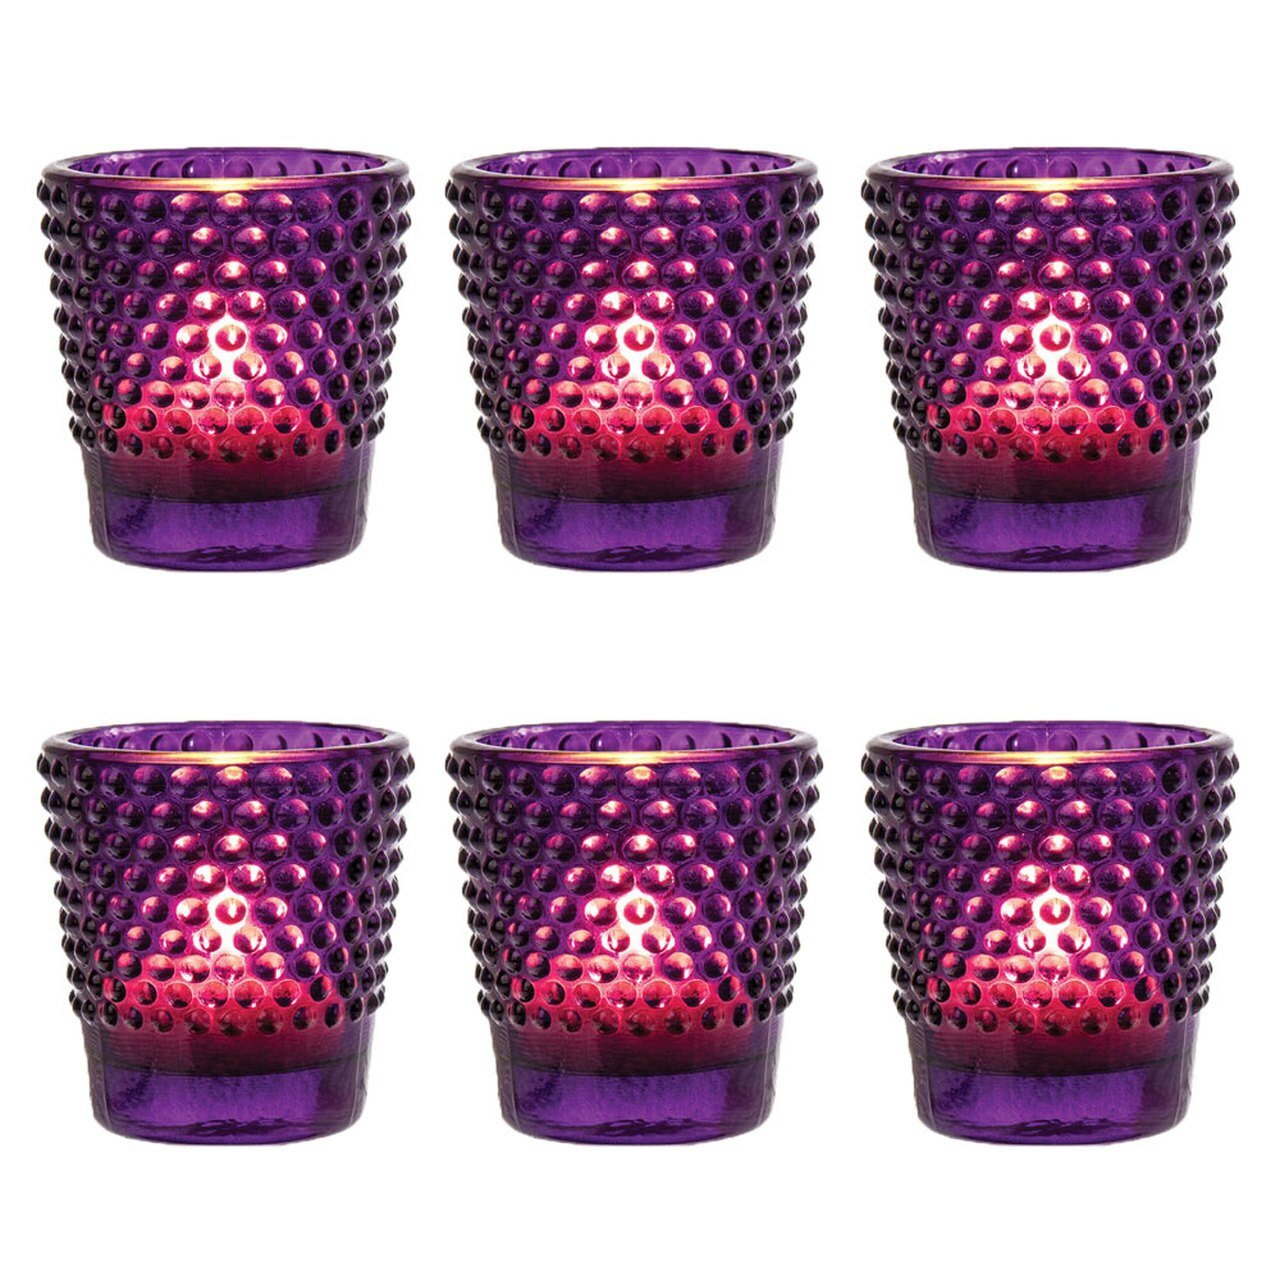 6 Pack | Vintage Hobnail Glass Candle Holder (2.25-Inches, Candace Design, Royal Purple) - For Use with Tea Lights - For Home Decor, Parties and Wedding Decorations - AsianImportStore.com - B2B Wholesale Lighting & Decor since 2002